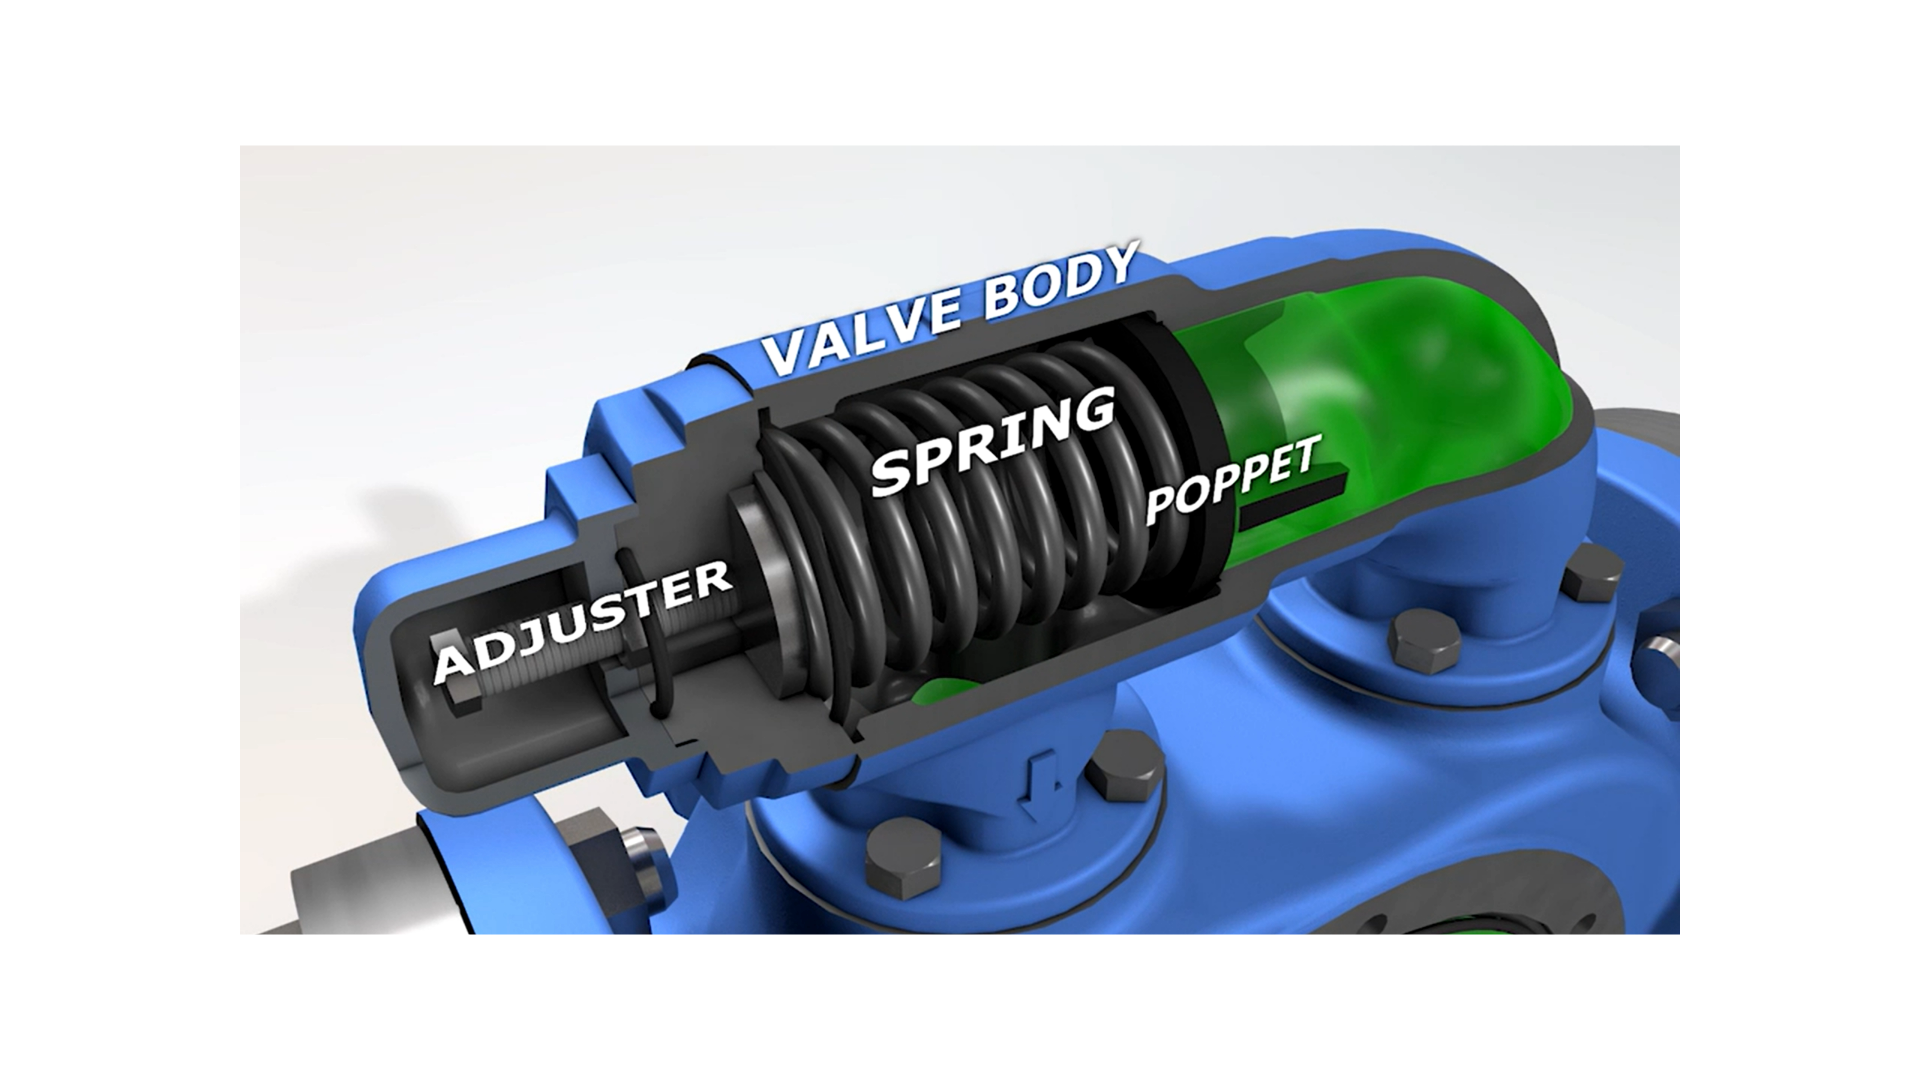 Figure 3 – Relief Valve Cutaway showing adjusting screw, spring and poppet (immersed in green liquid)